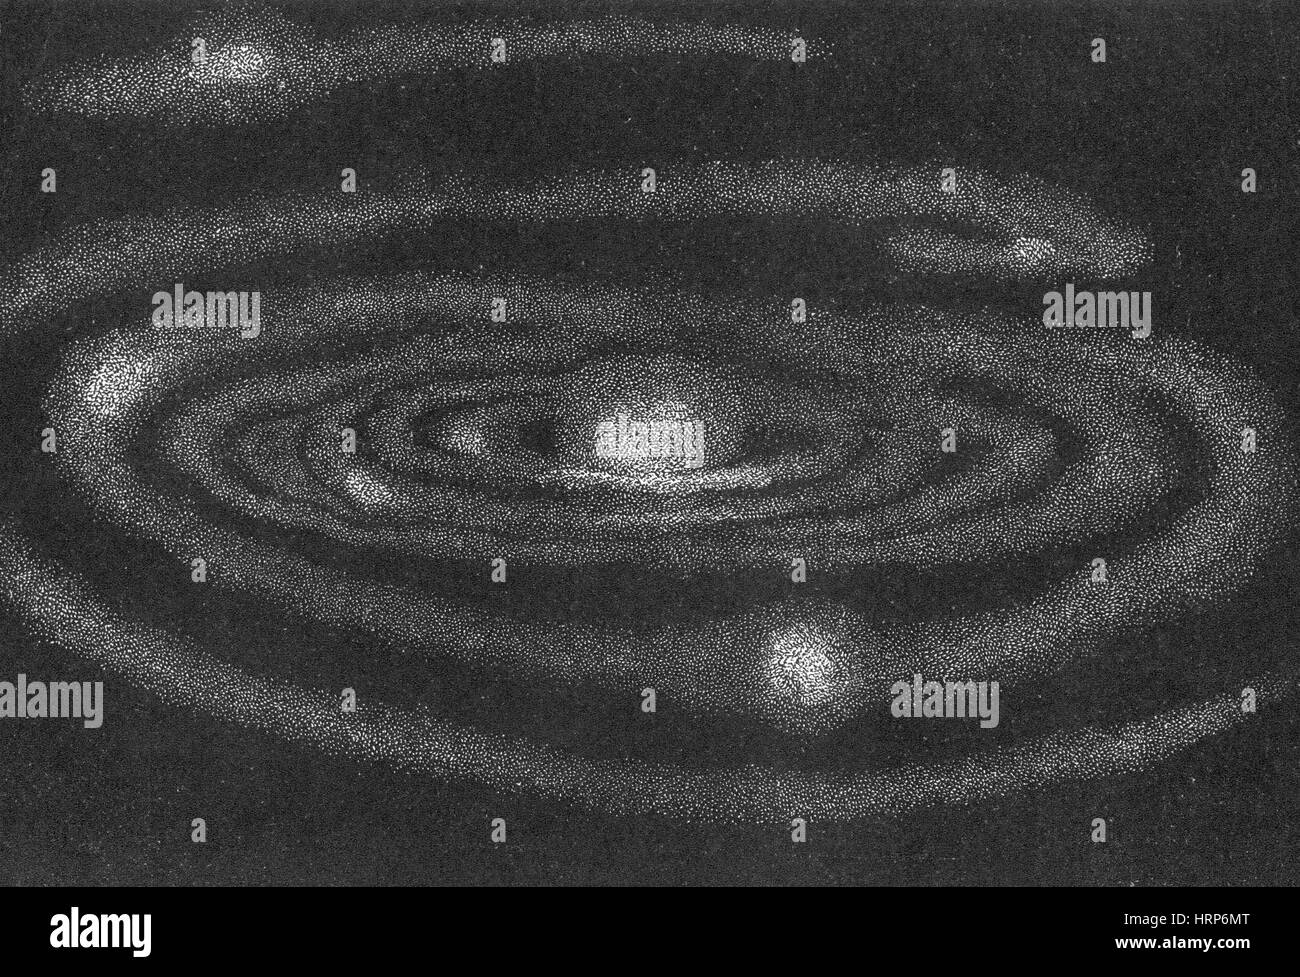 Cosmic Black and White Stock Photos & Images - Alamy